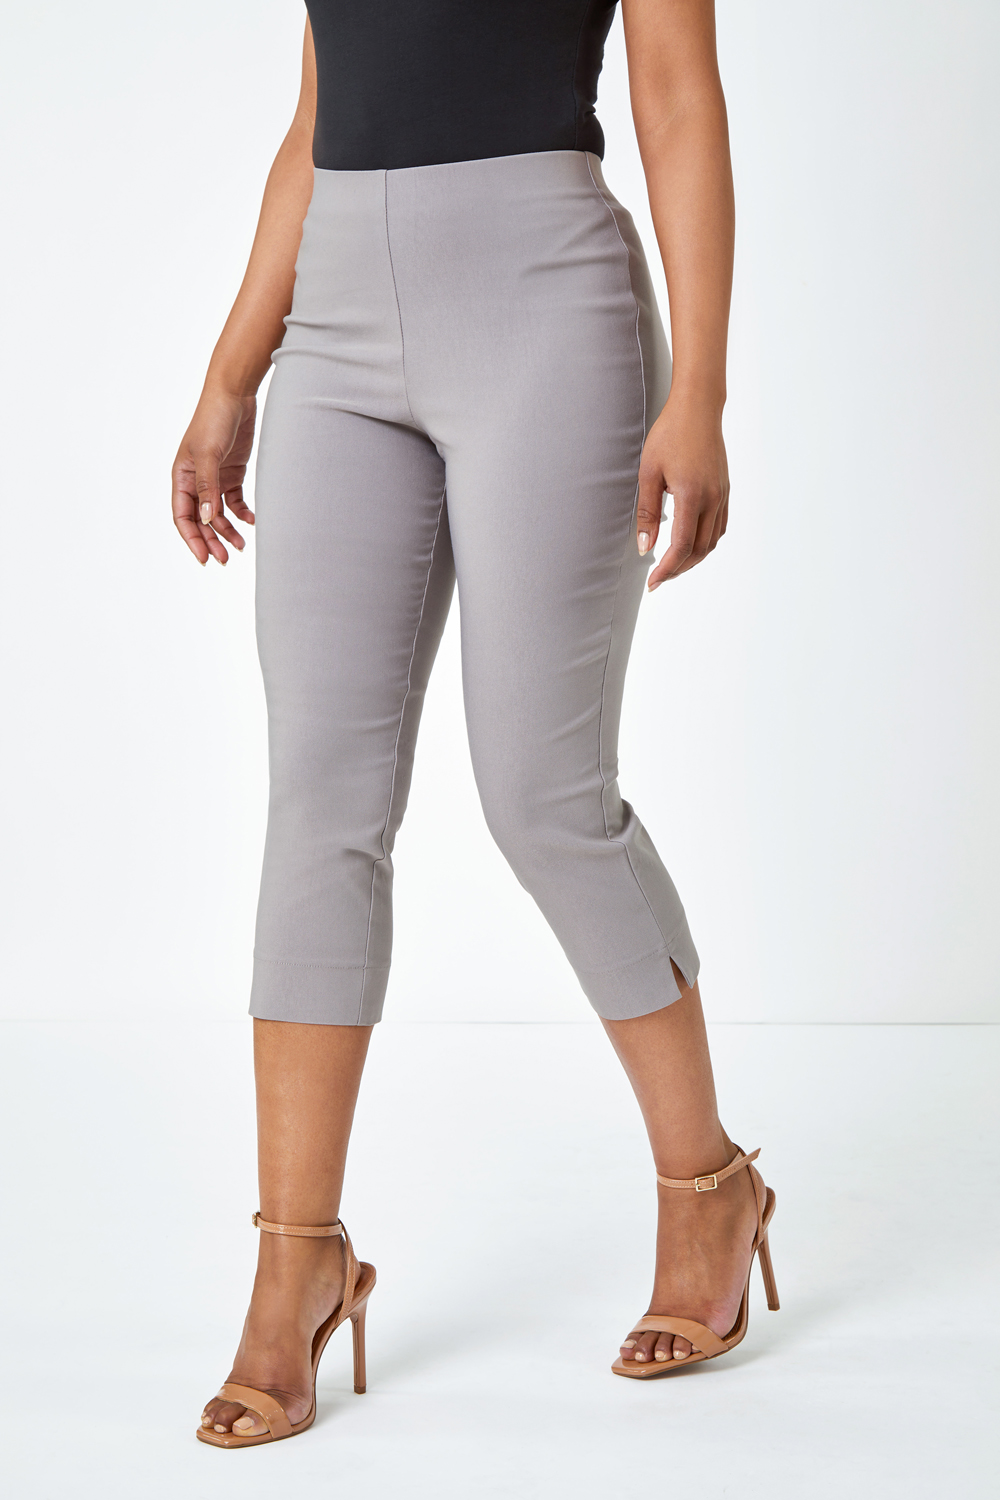 Taupe Petite Cropped Stretch Trouser, Image 2 of 5